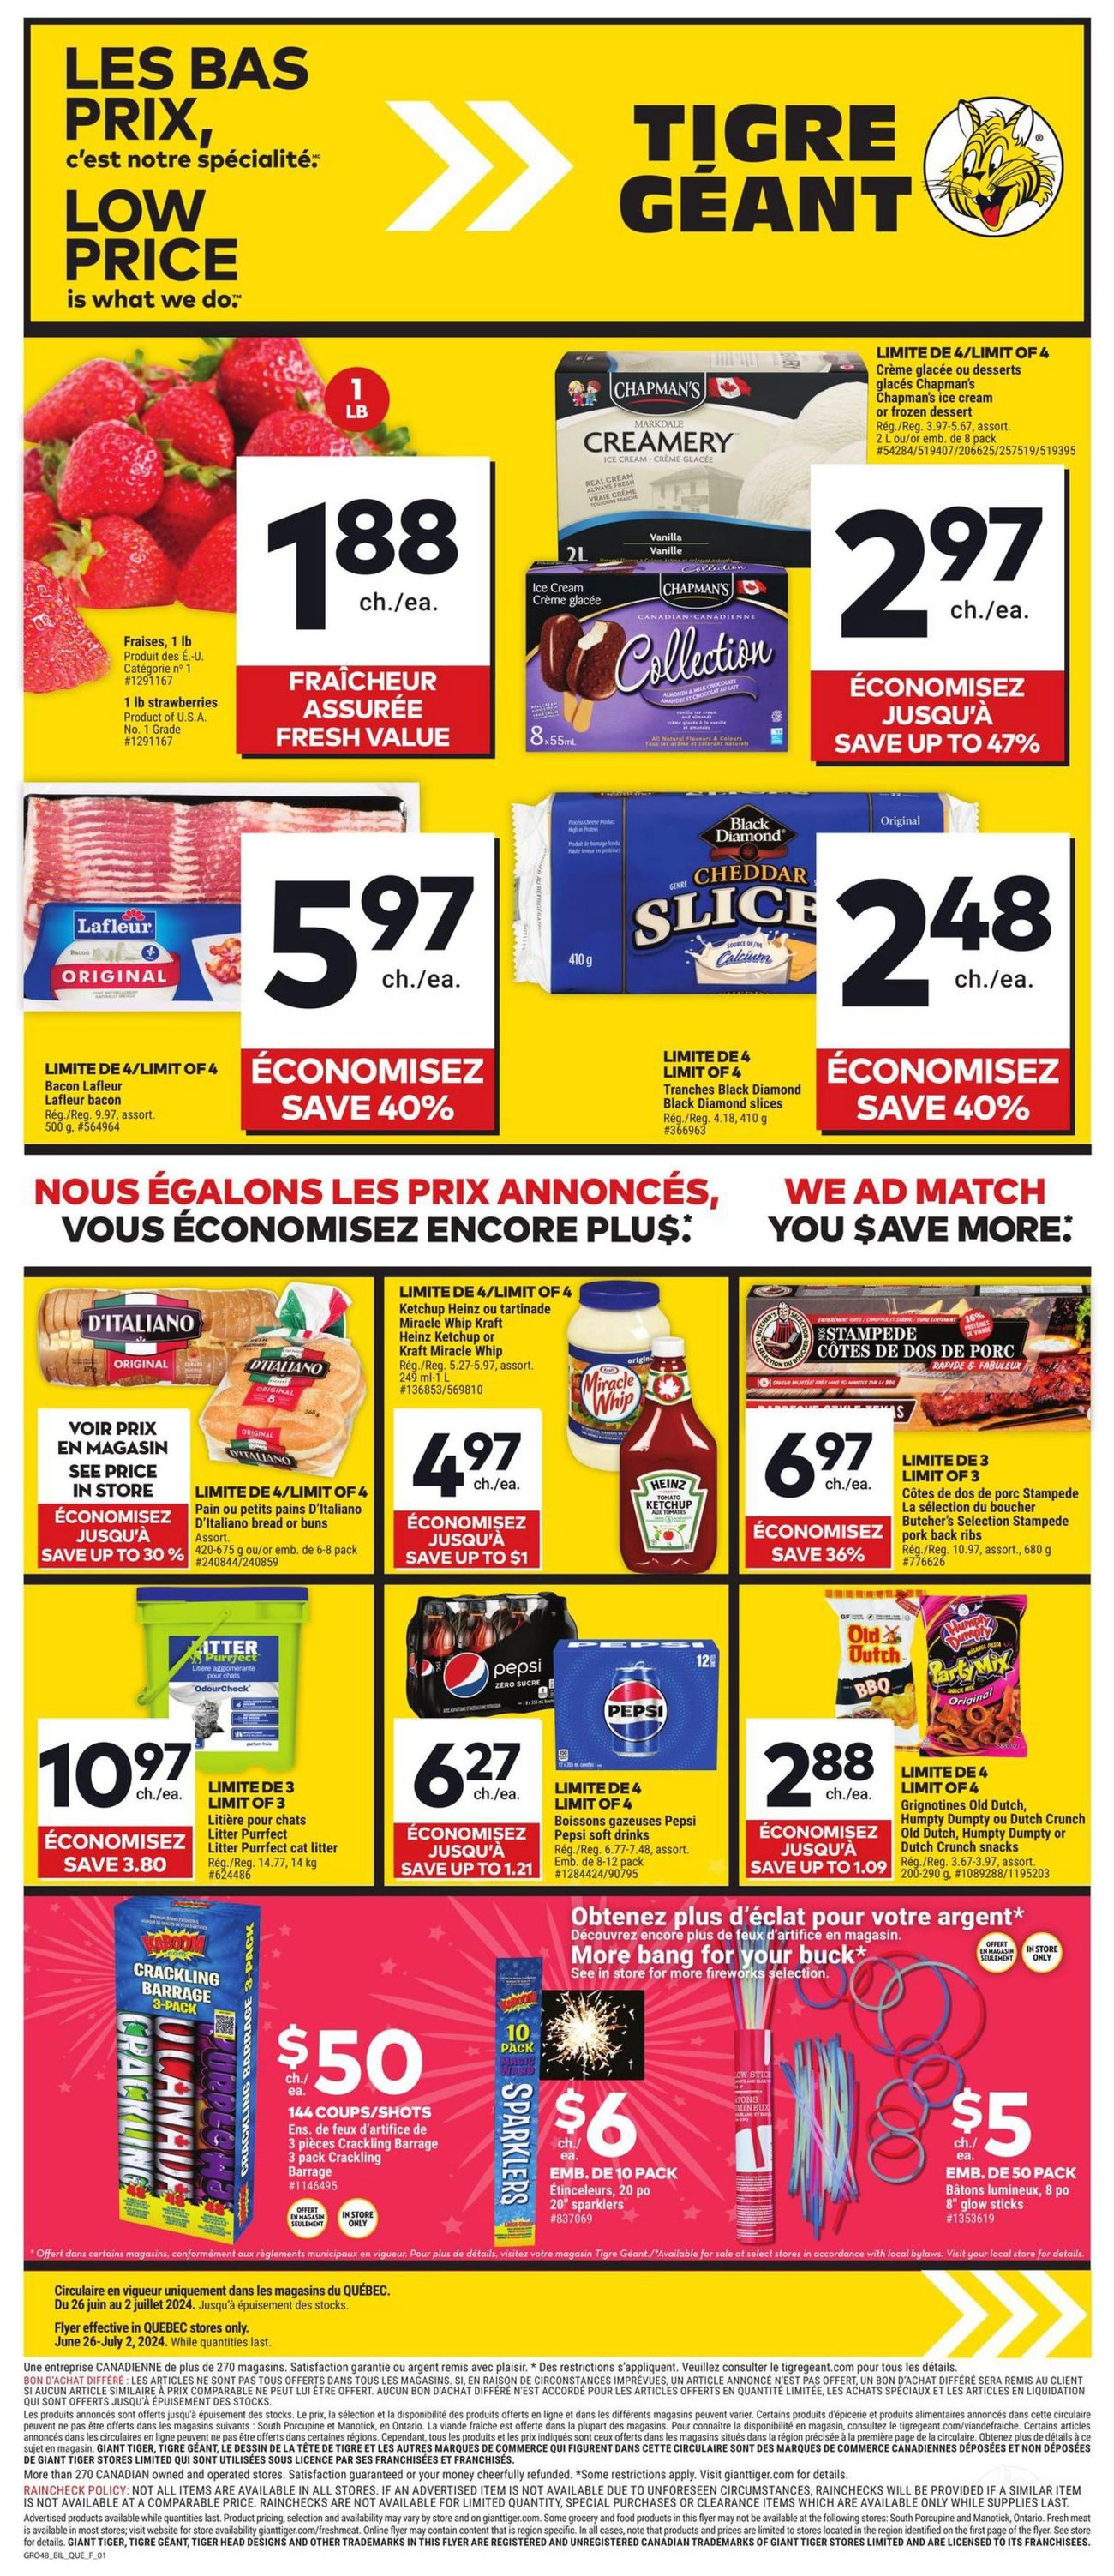 Giant Tiger - Quebec - Weekly Flyer Specials - Page 1